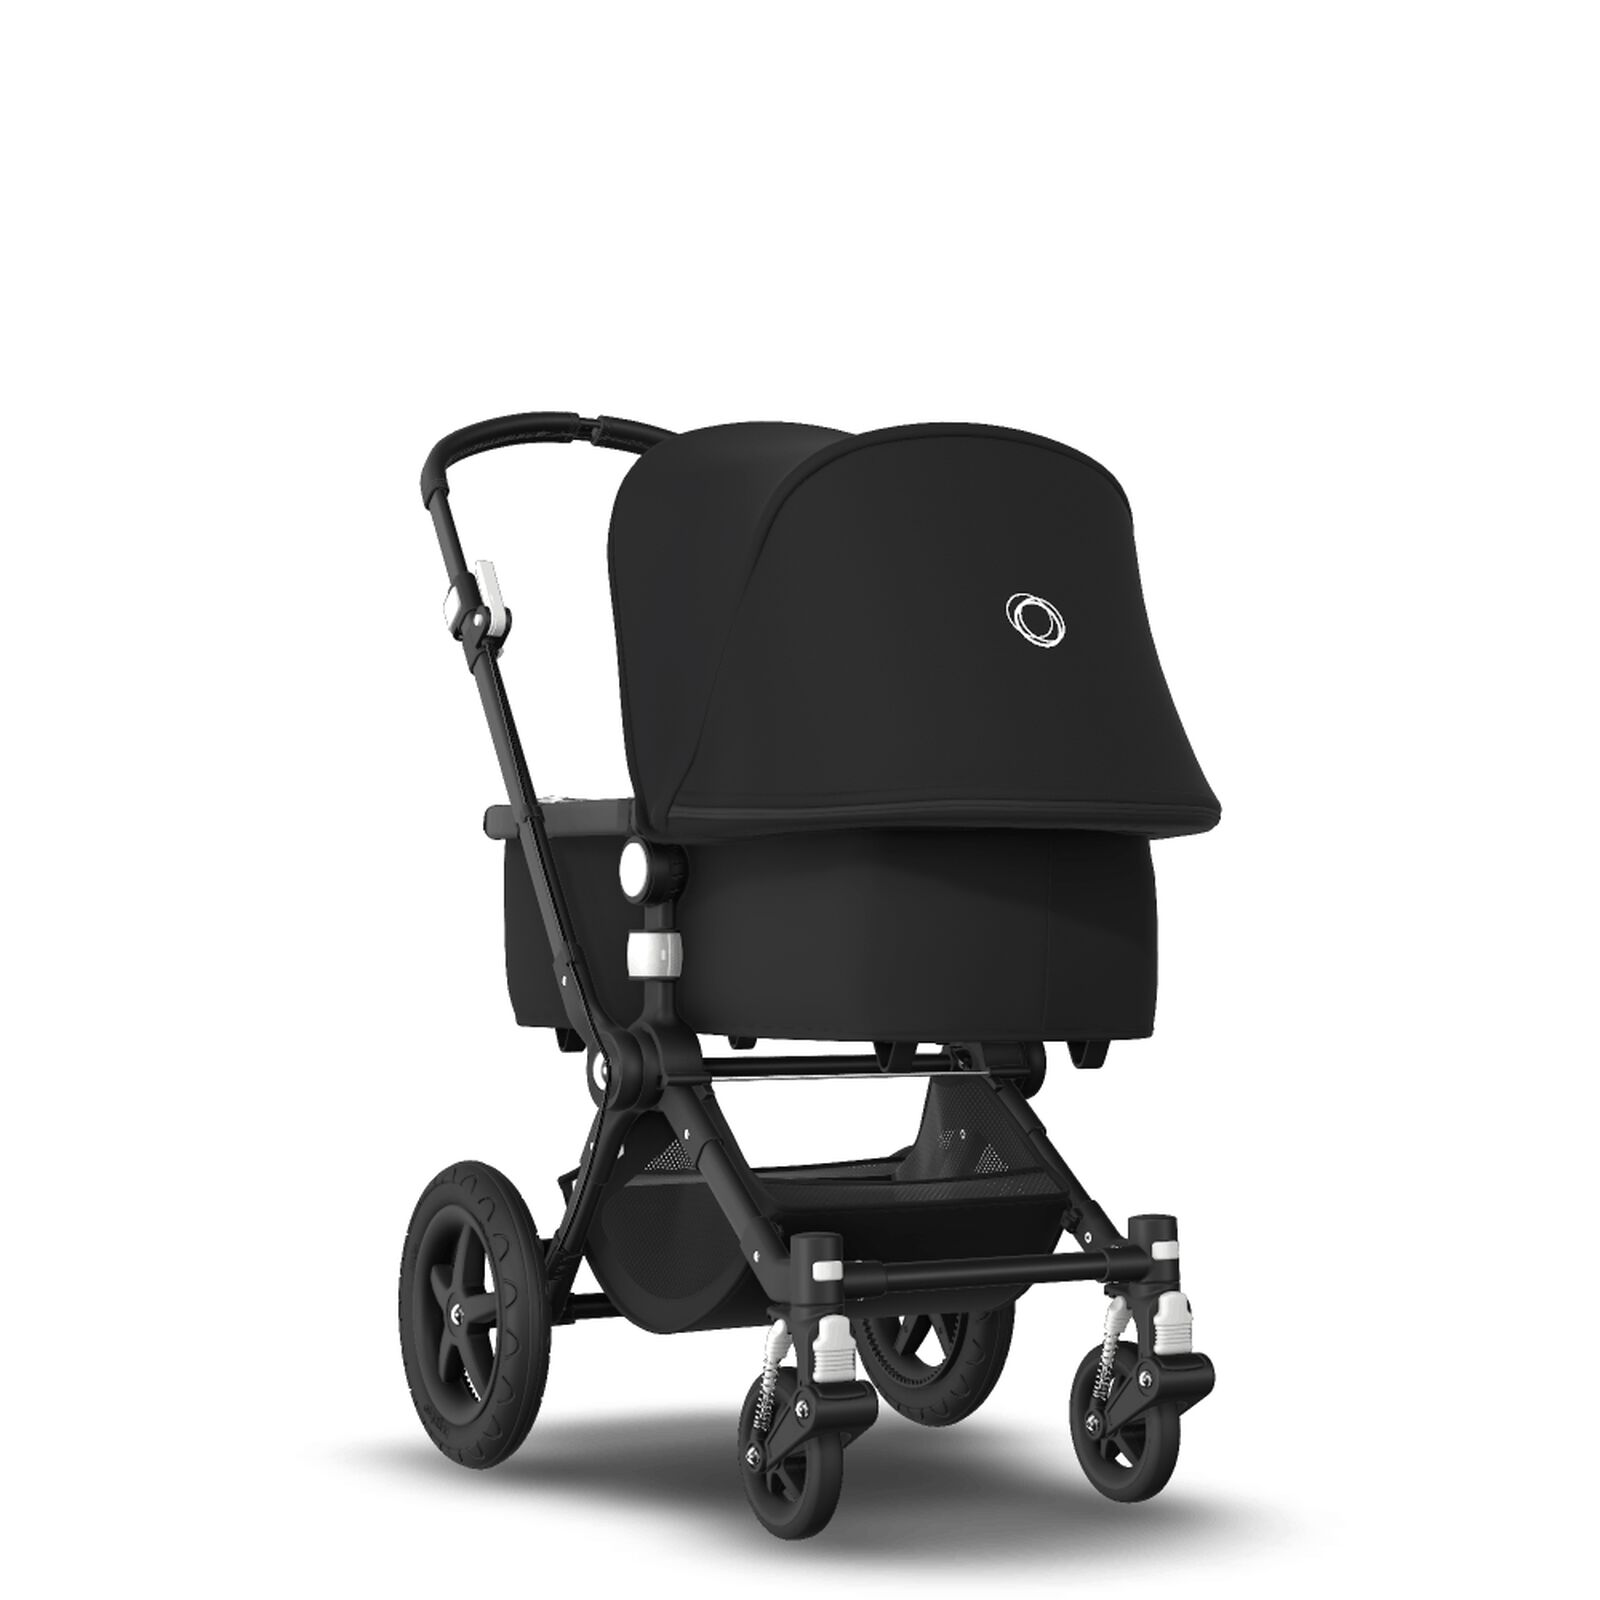 Bugaboo Cameleon 3 Plus bassinet and seat stroller - View 1